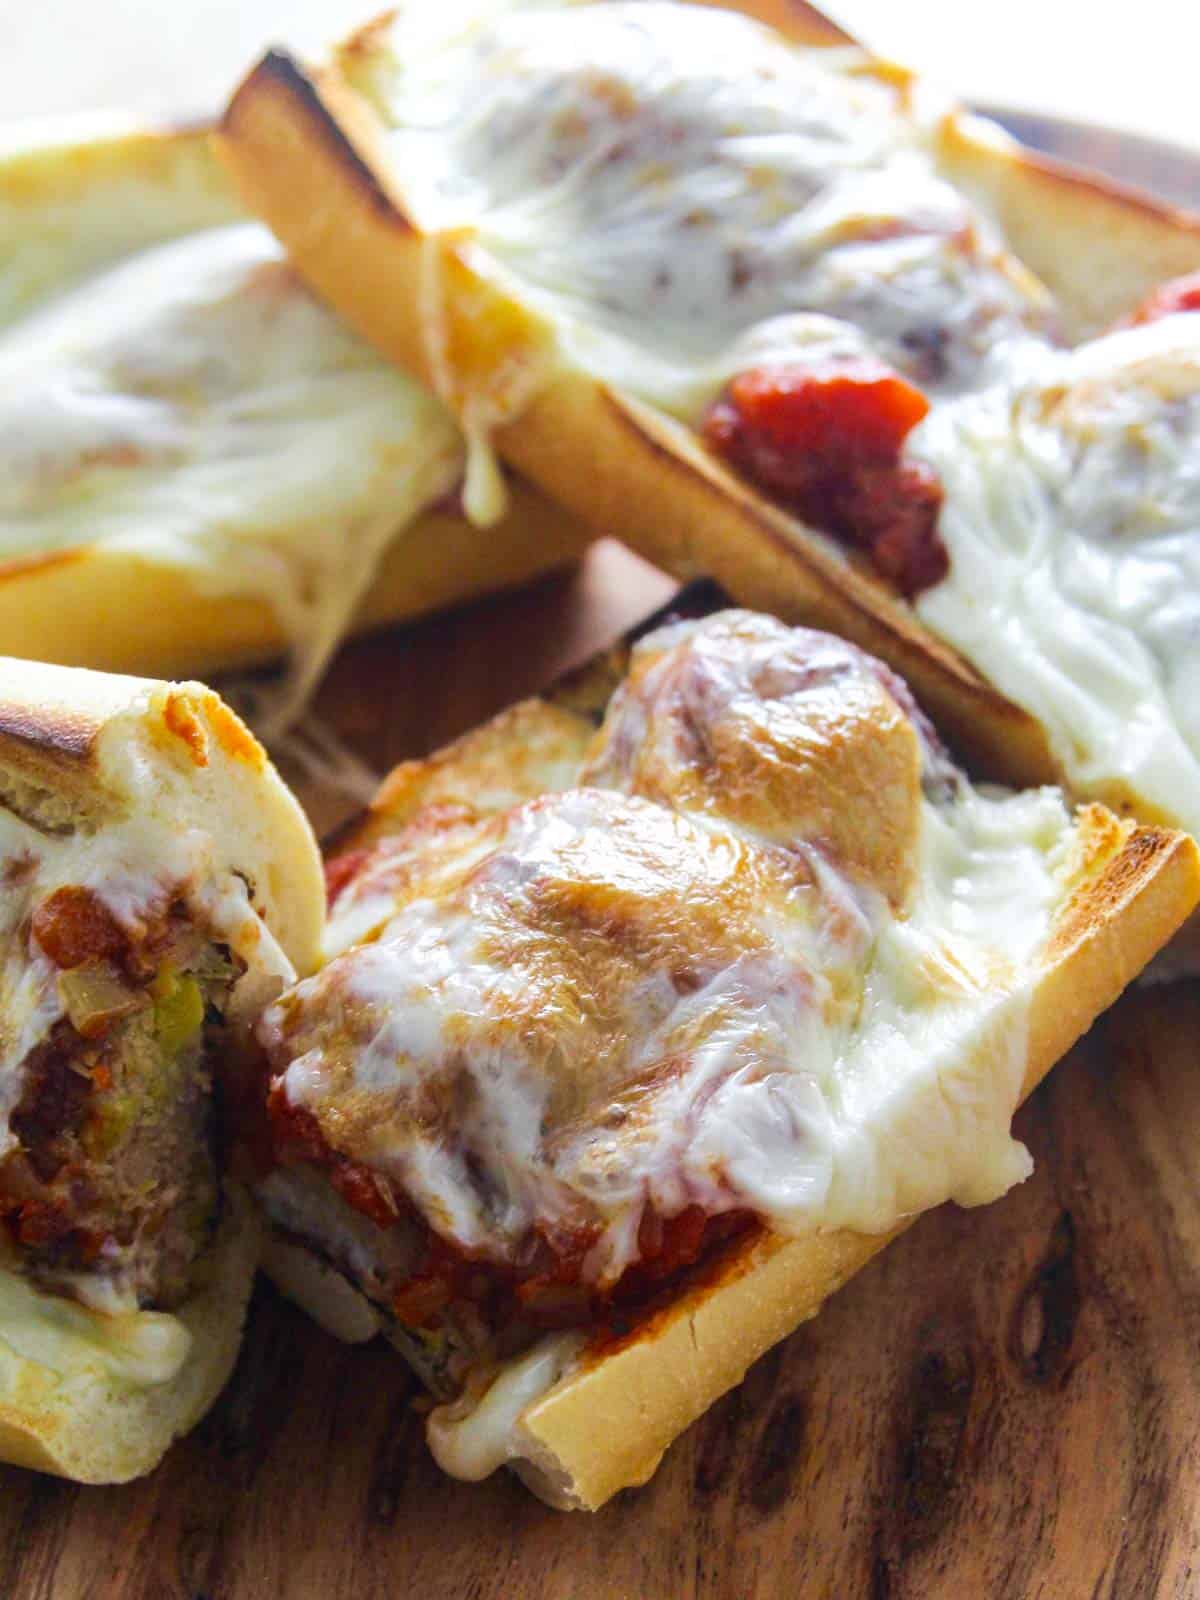 A hot meatball sub sandwich with marinara sauce and melted golden brown cheese.